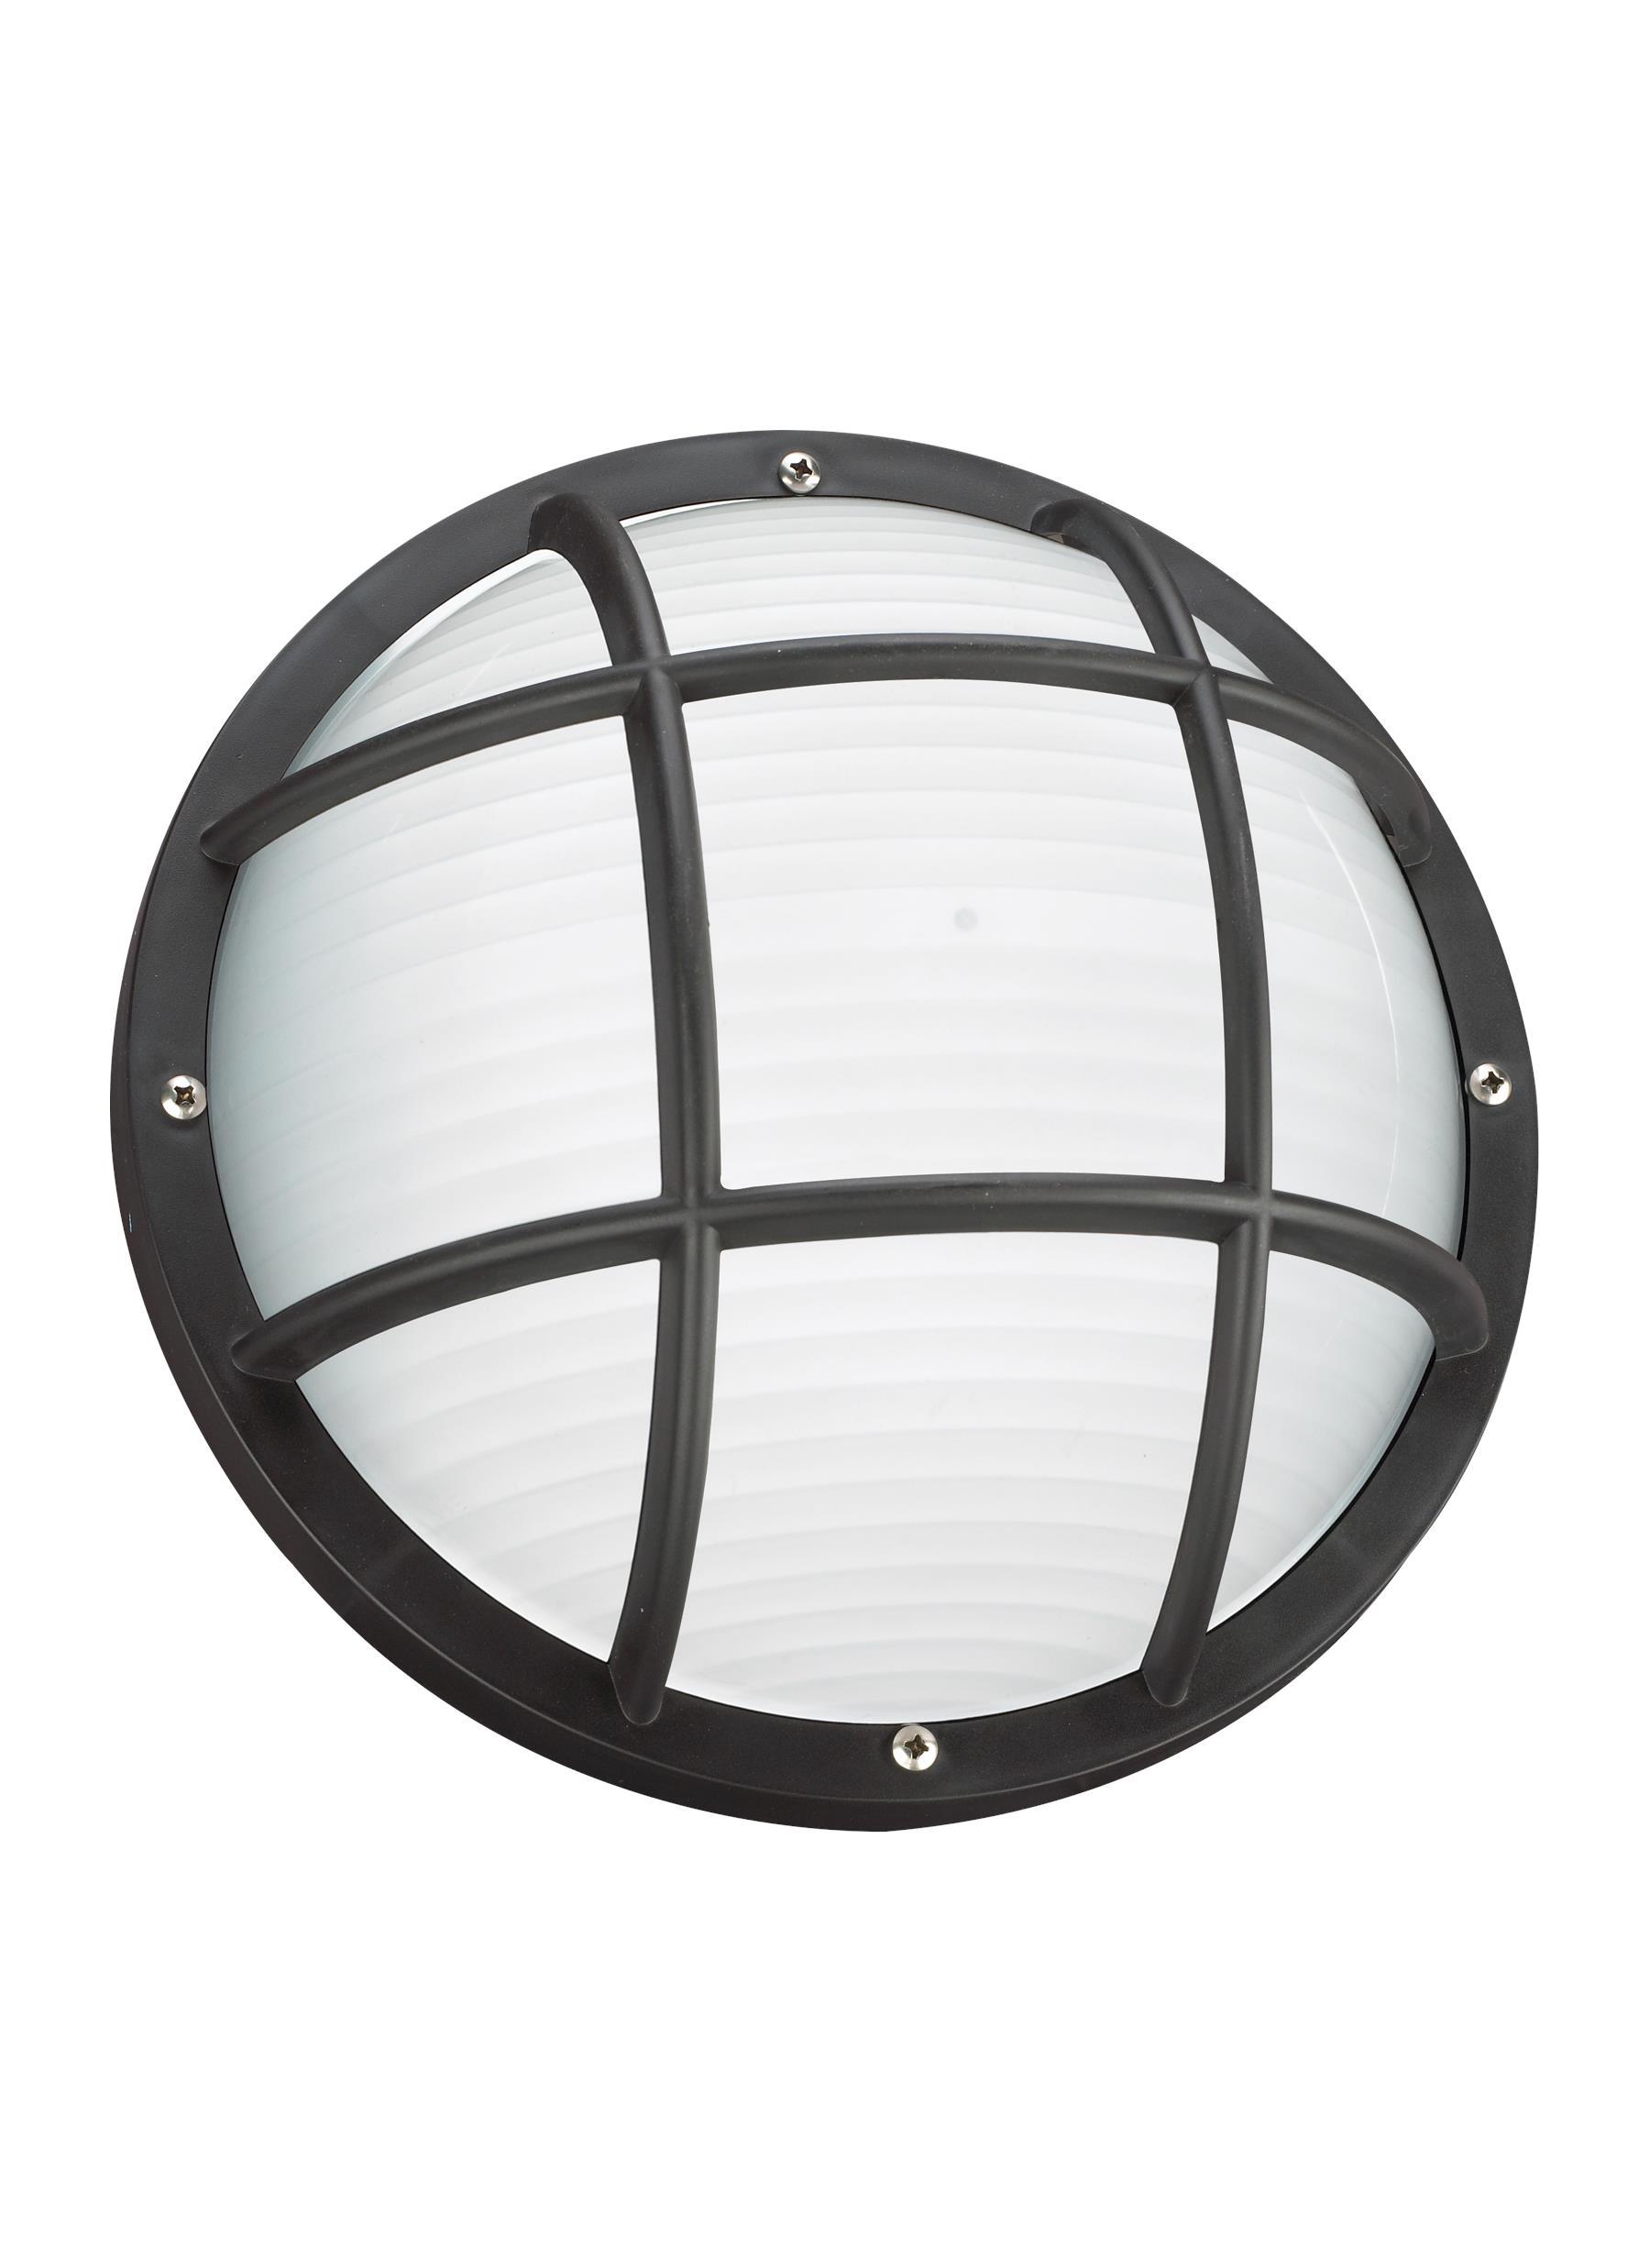 Bayside One Light Outdoor LED Wall / Ceiling Mount - Black Outdoor Sea Gull Lighting 